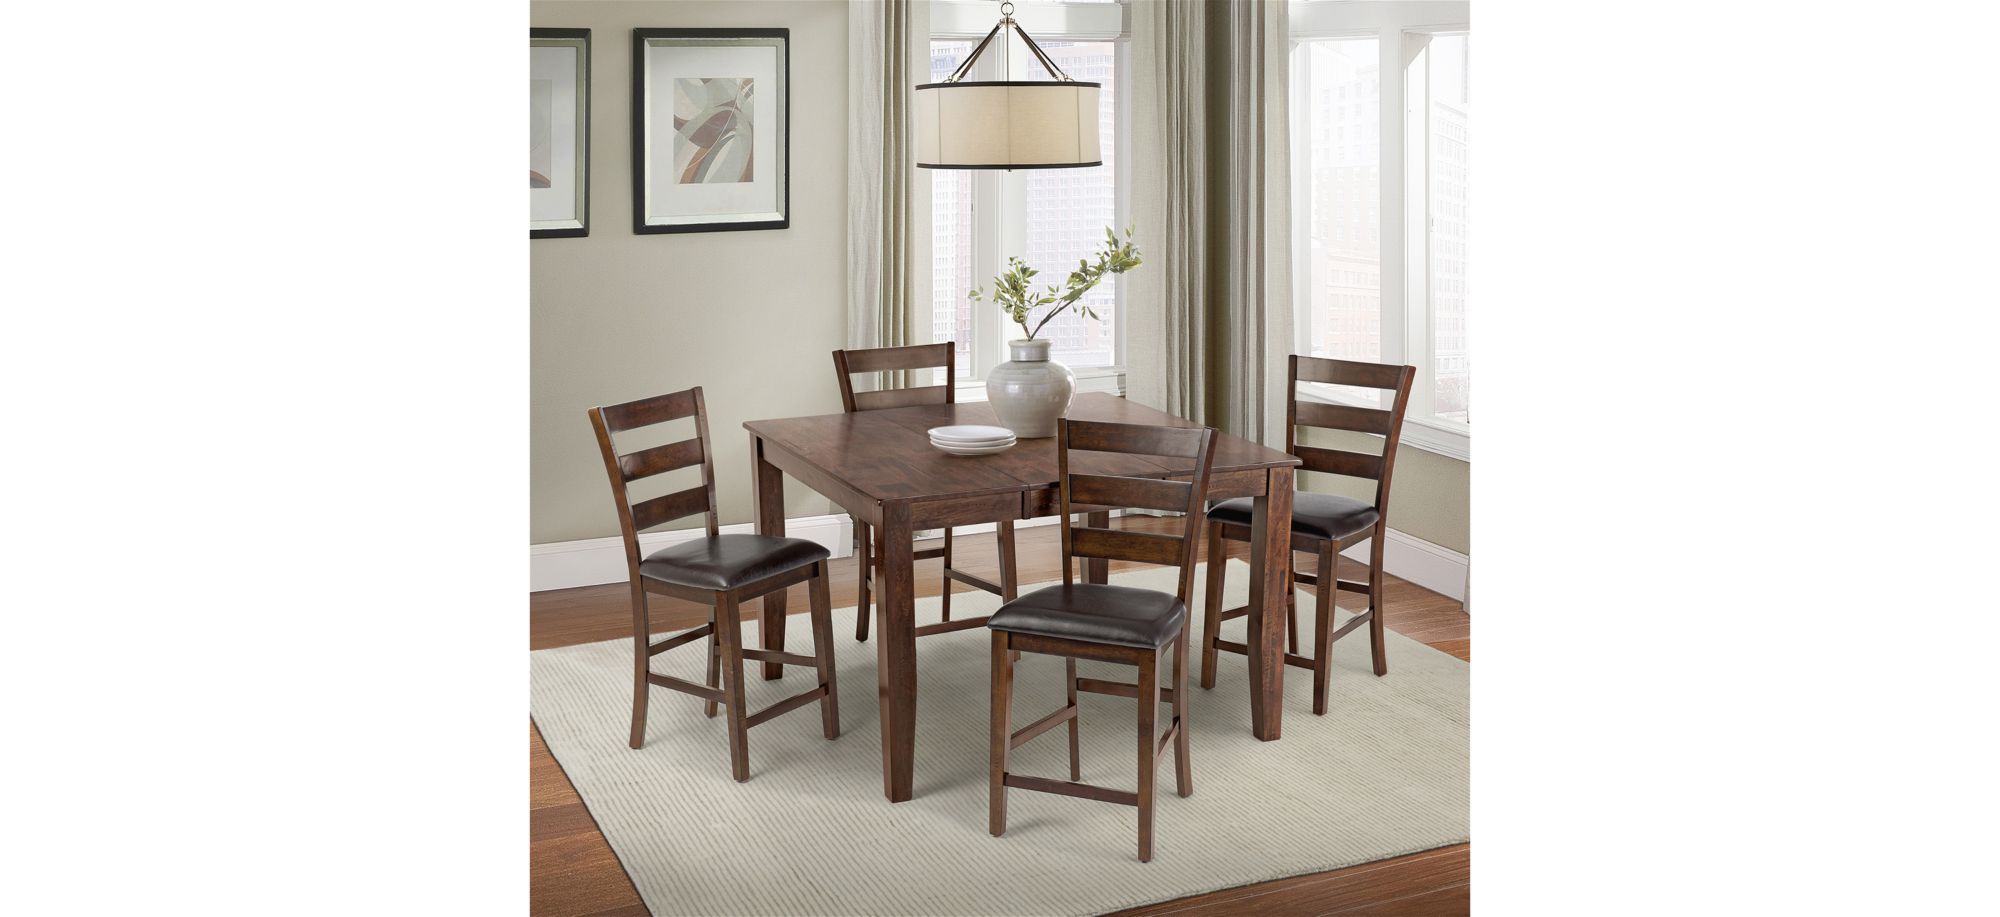 Kona 5-pc. Counter Height Dining Set in Merlot by Intercon